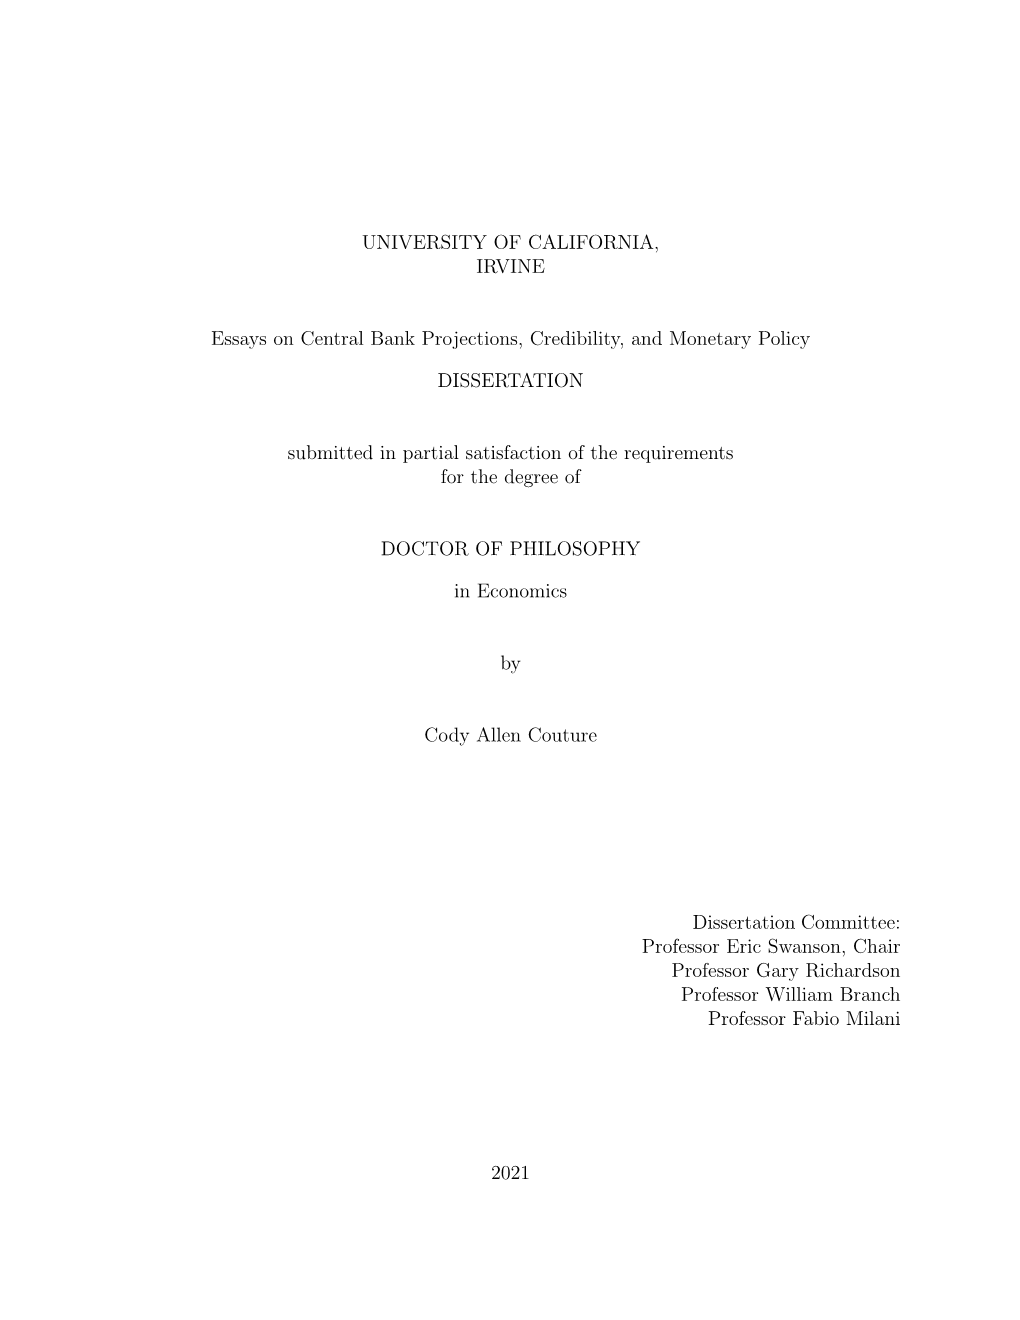 Essays on Central Bank Projections, Credibility, and Monetary Policy